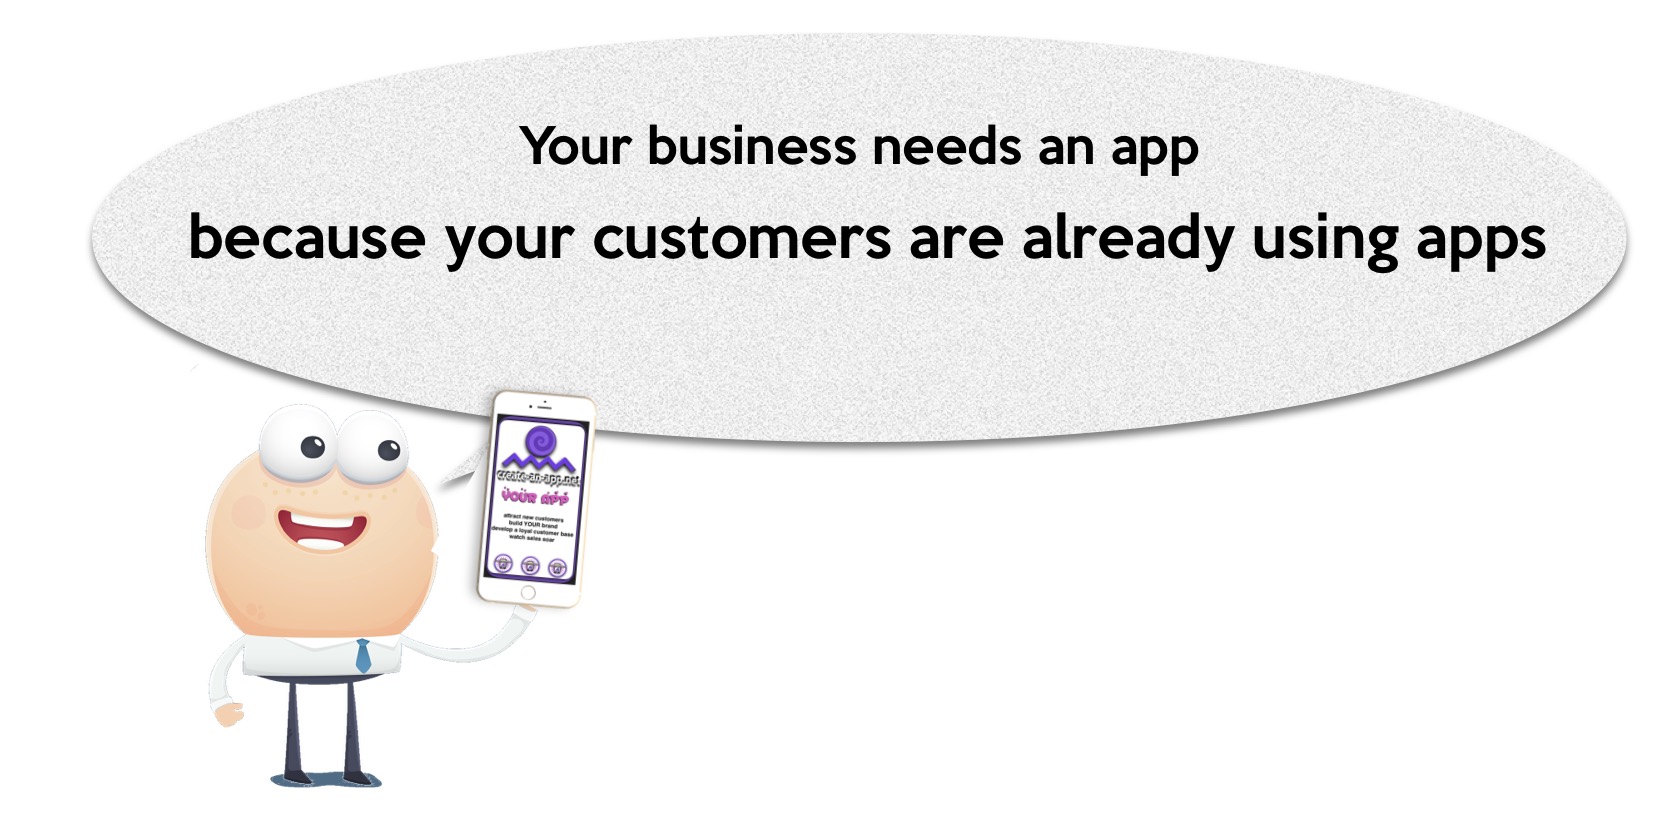 Your customers are already using apps